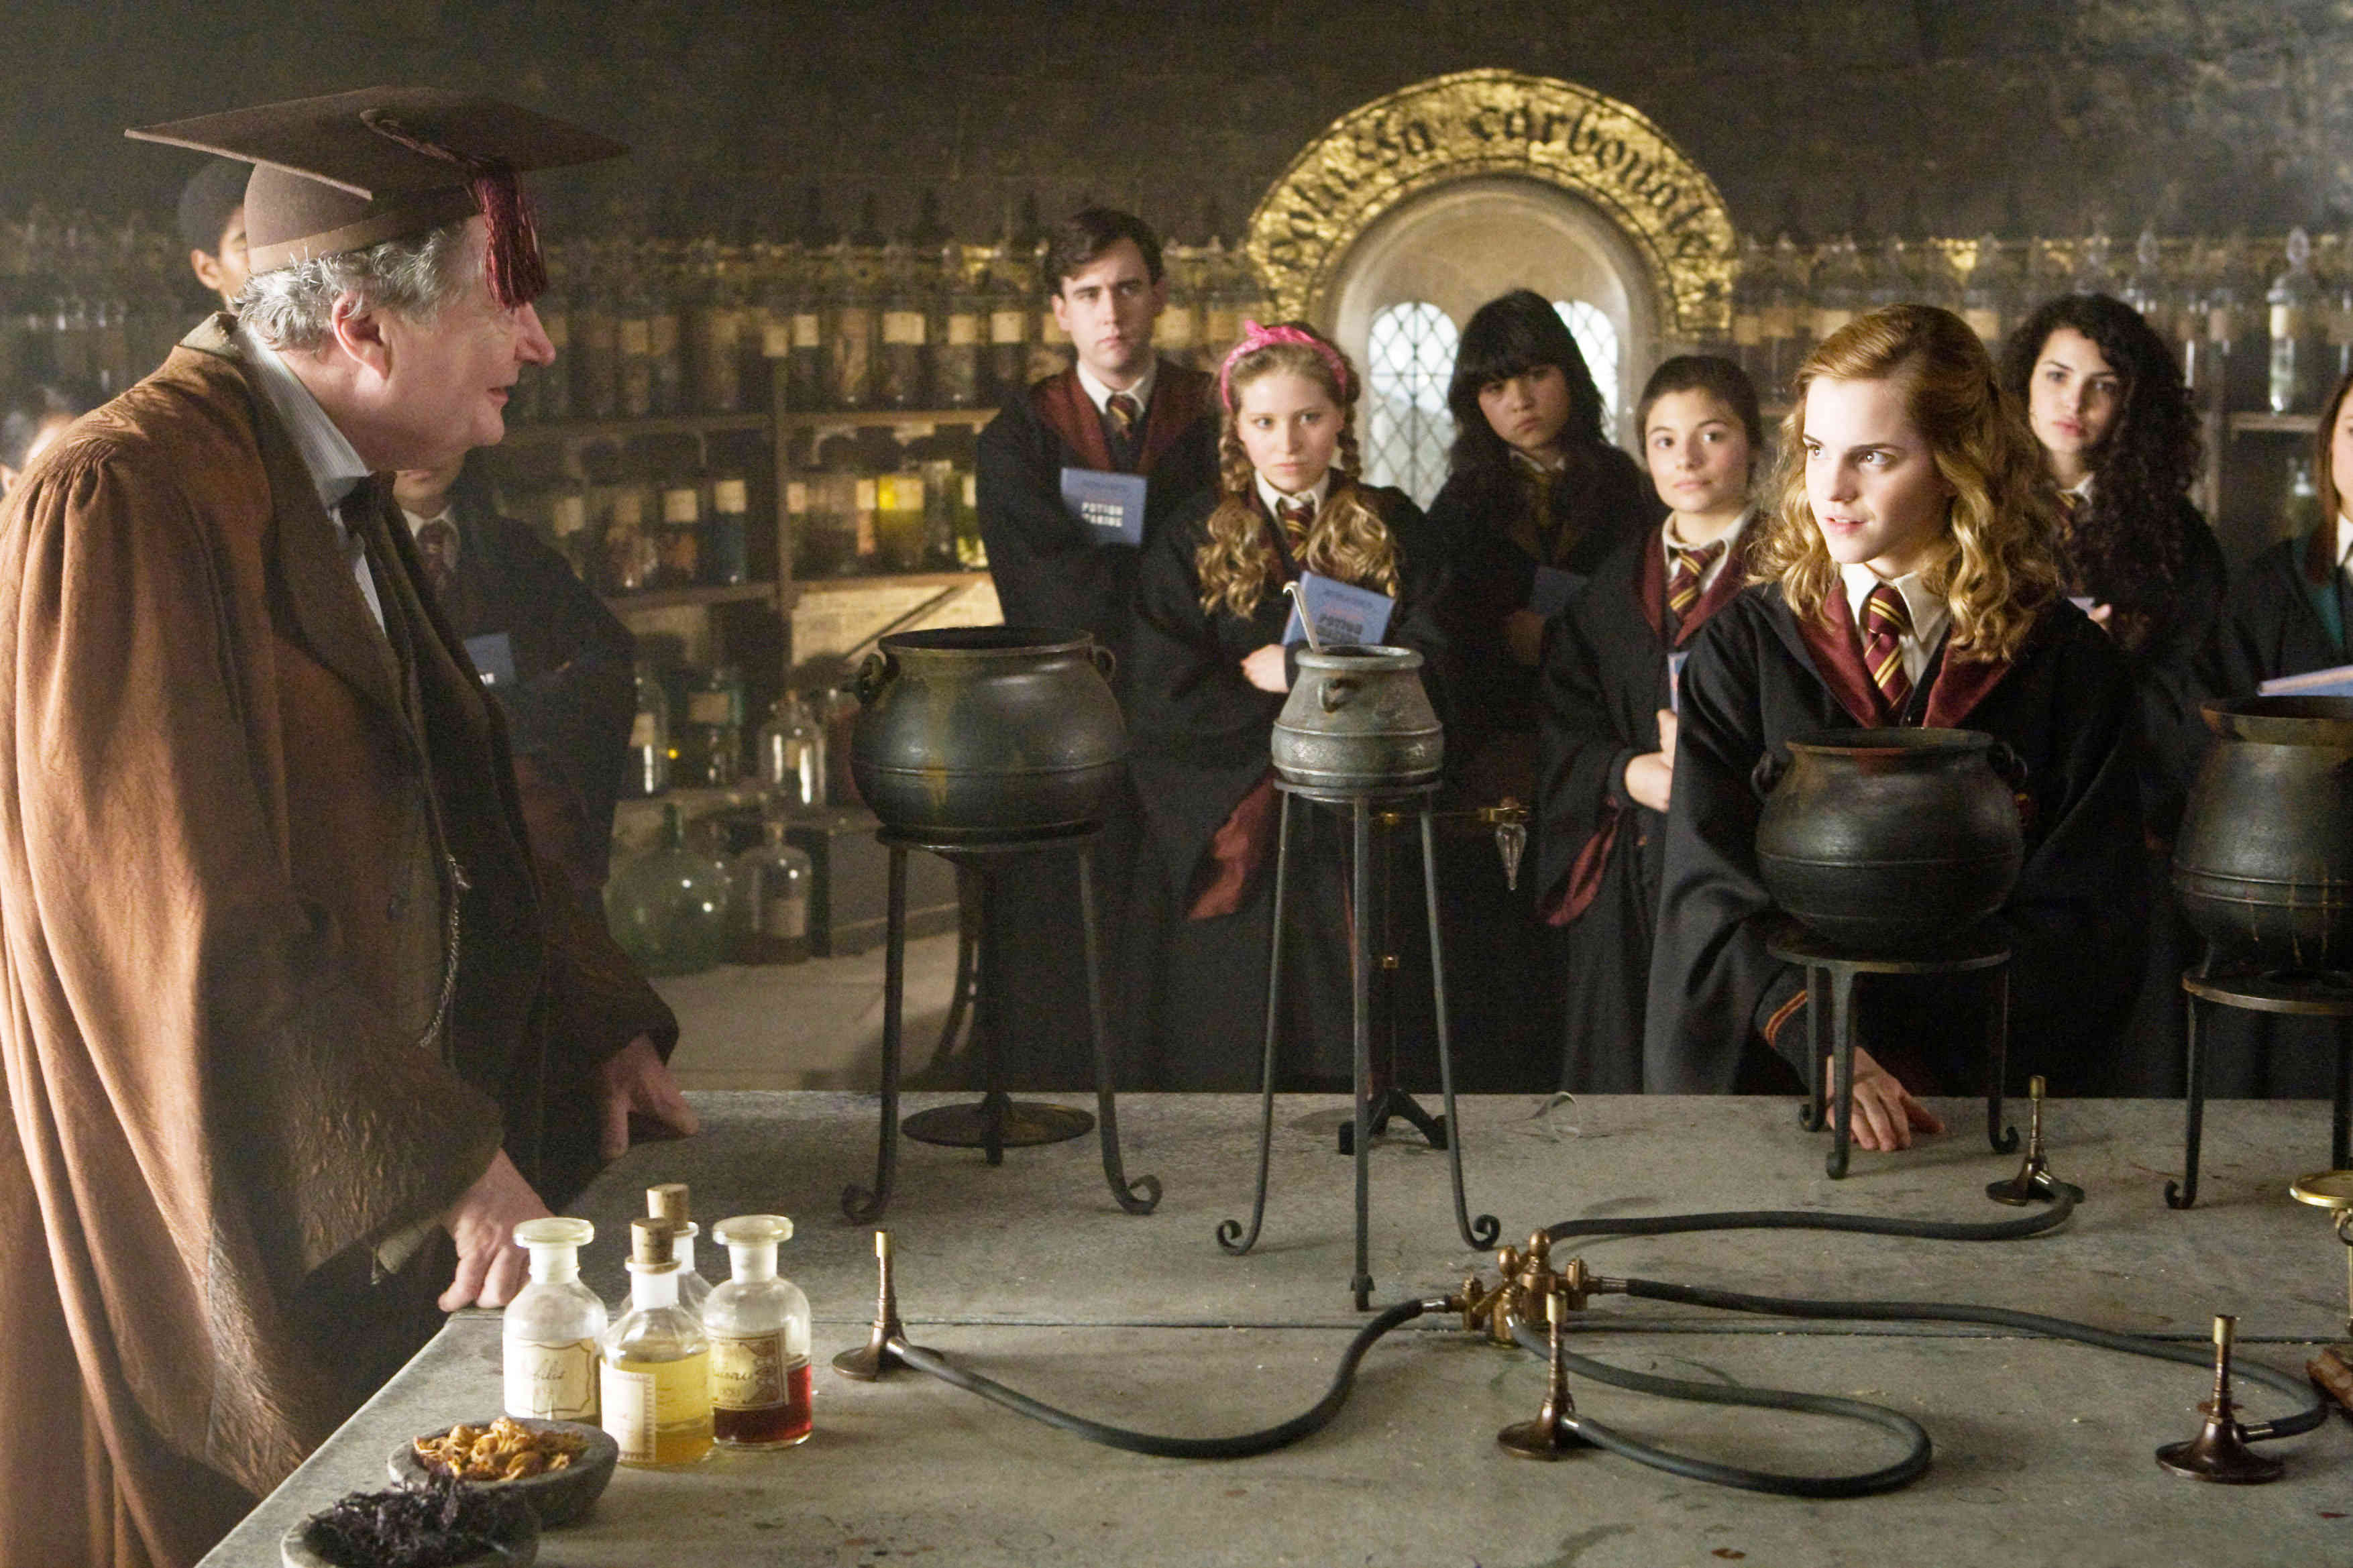 Jim Broadbent stars as Horace Slughorn and Emma Watson stars as Hermione Granger in Warner Bros Pictures' Harry Potter and the Half-Blood Prince (2009)